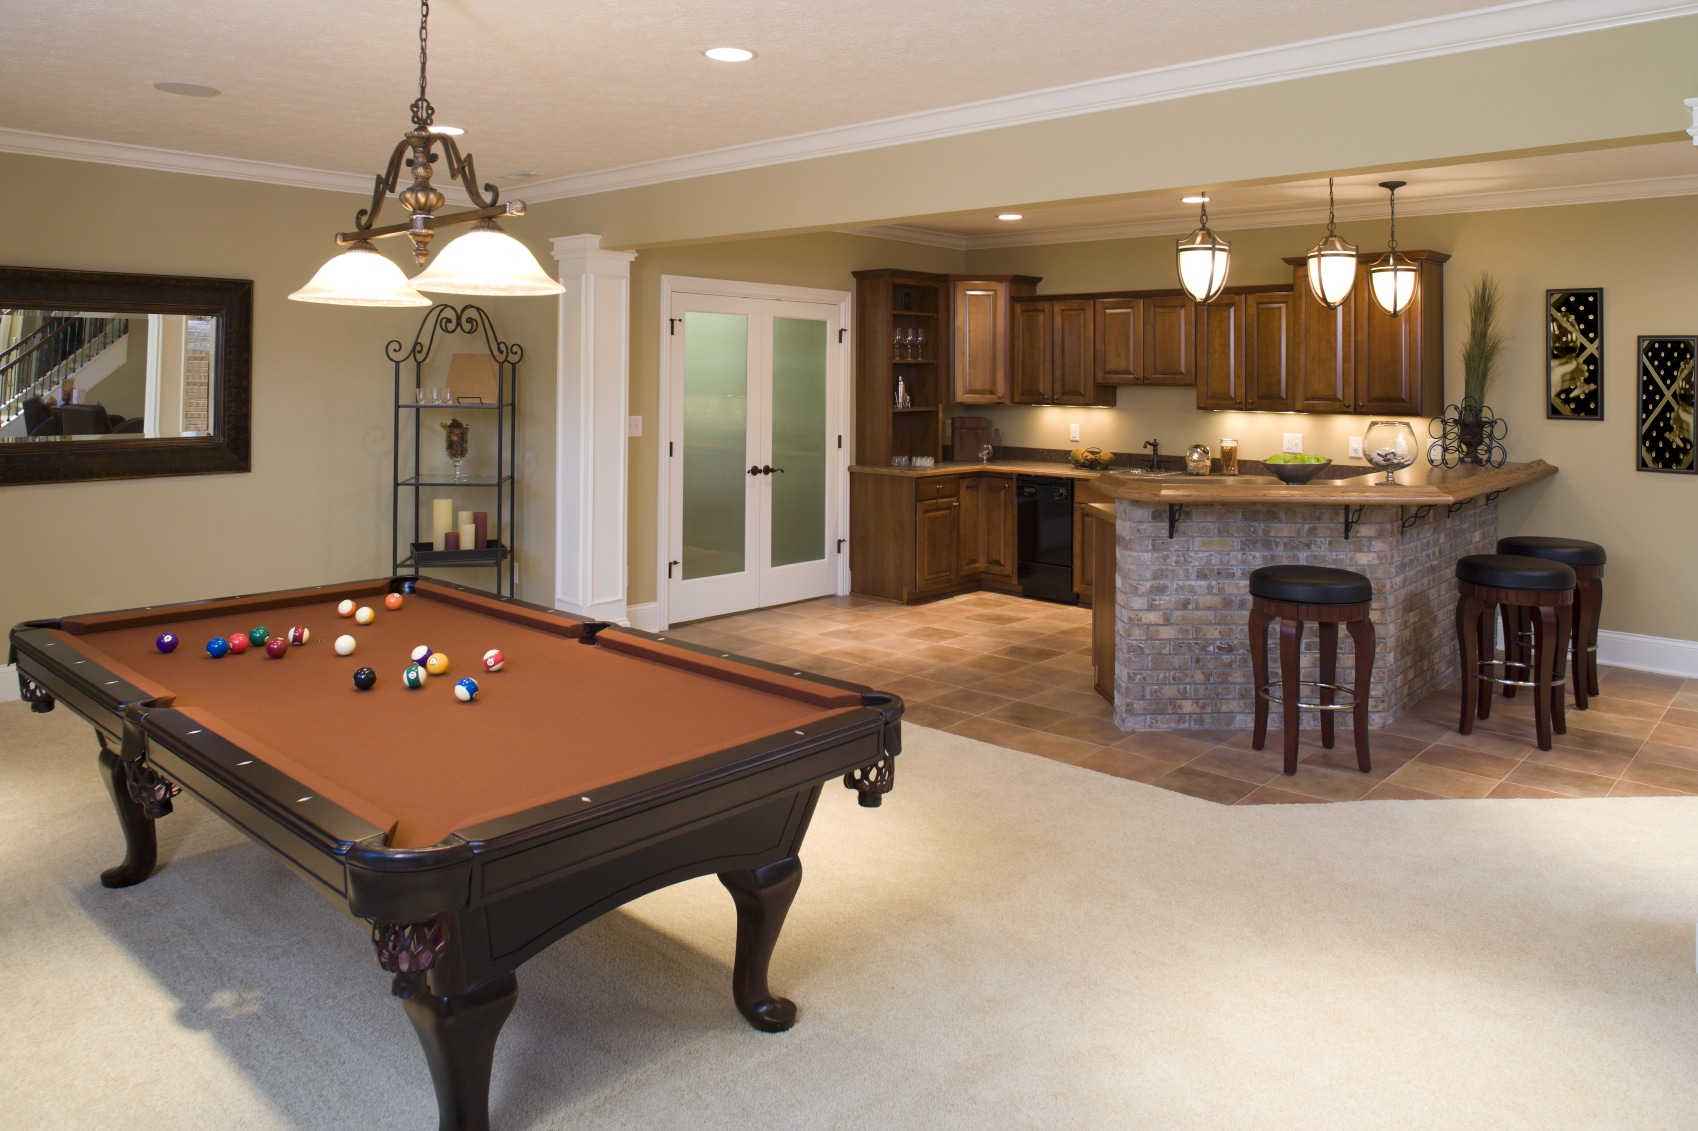 Basement Remodeling in Blaine, Minnesota and Surrounding Areas